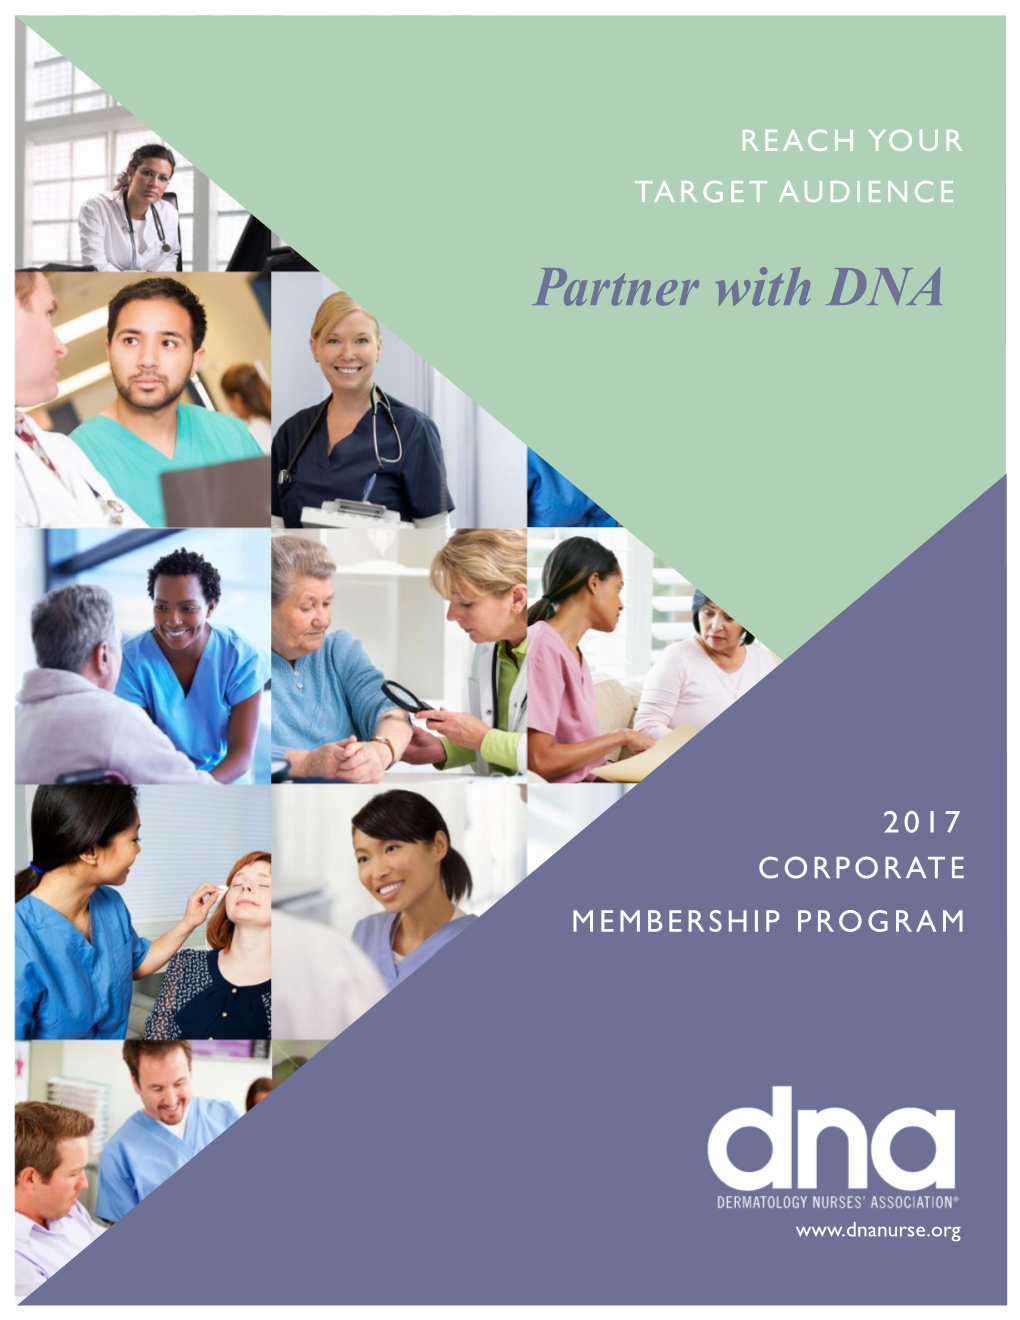 Partner with DNA